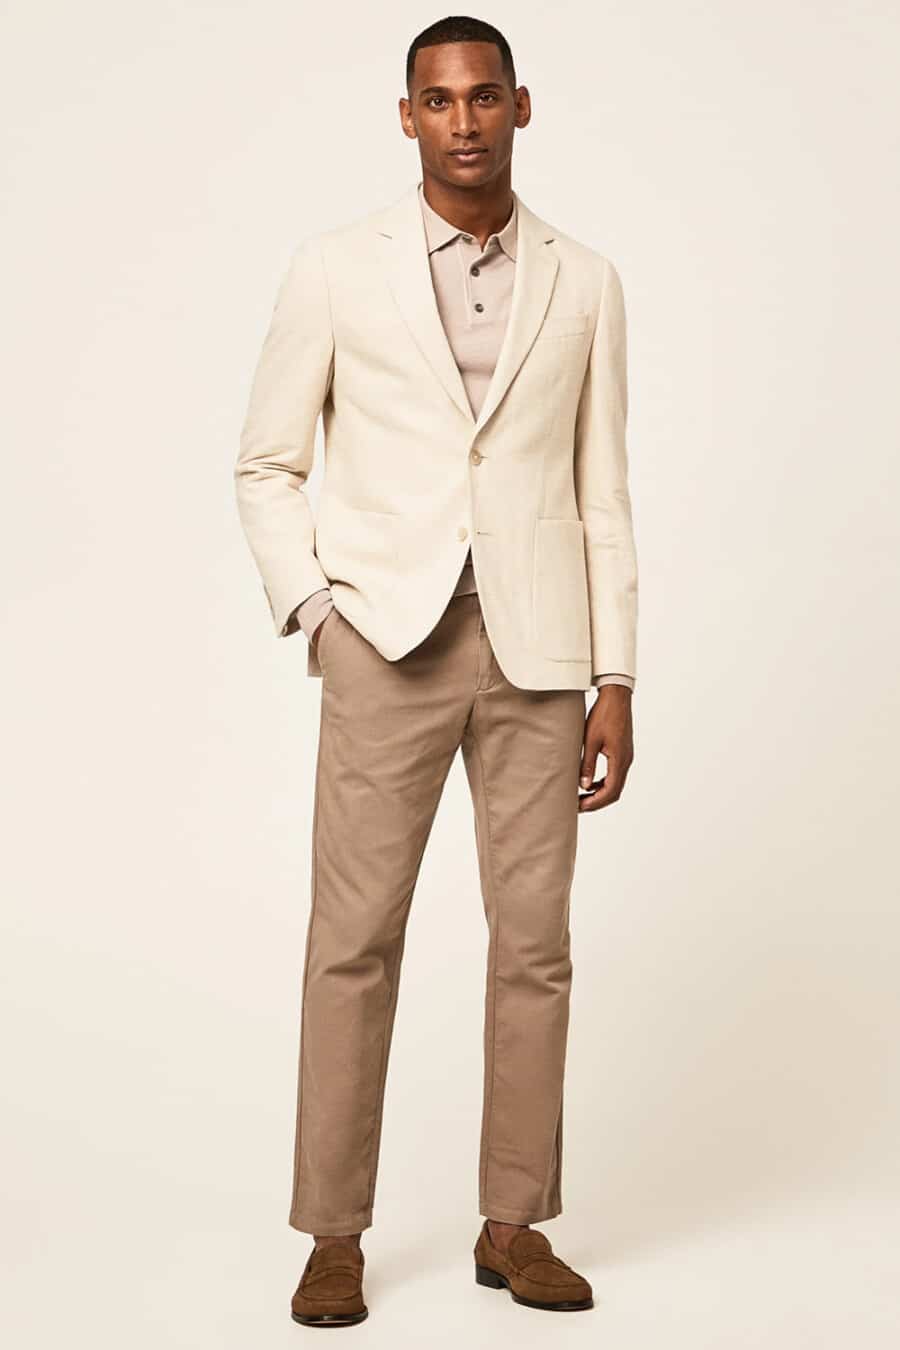 Men's brown pants, taupe polo shirt, cream blazer and brown suede penny loafers outfit